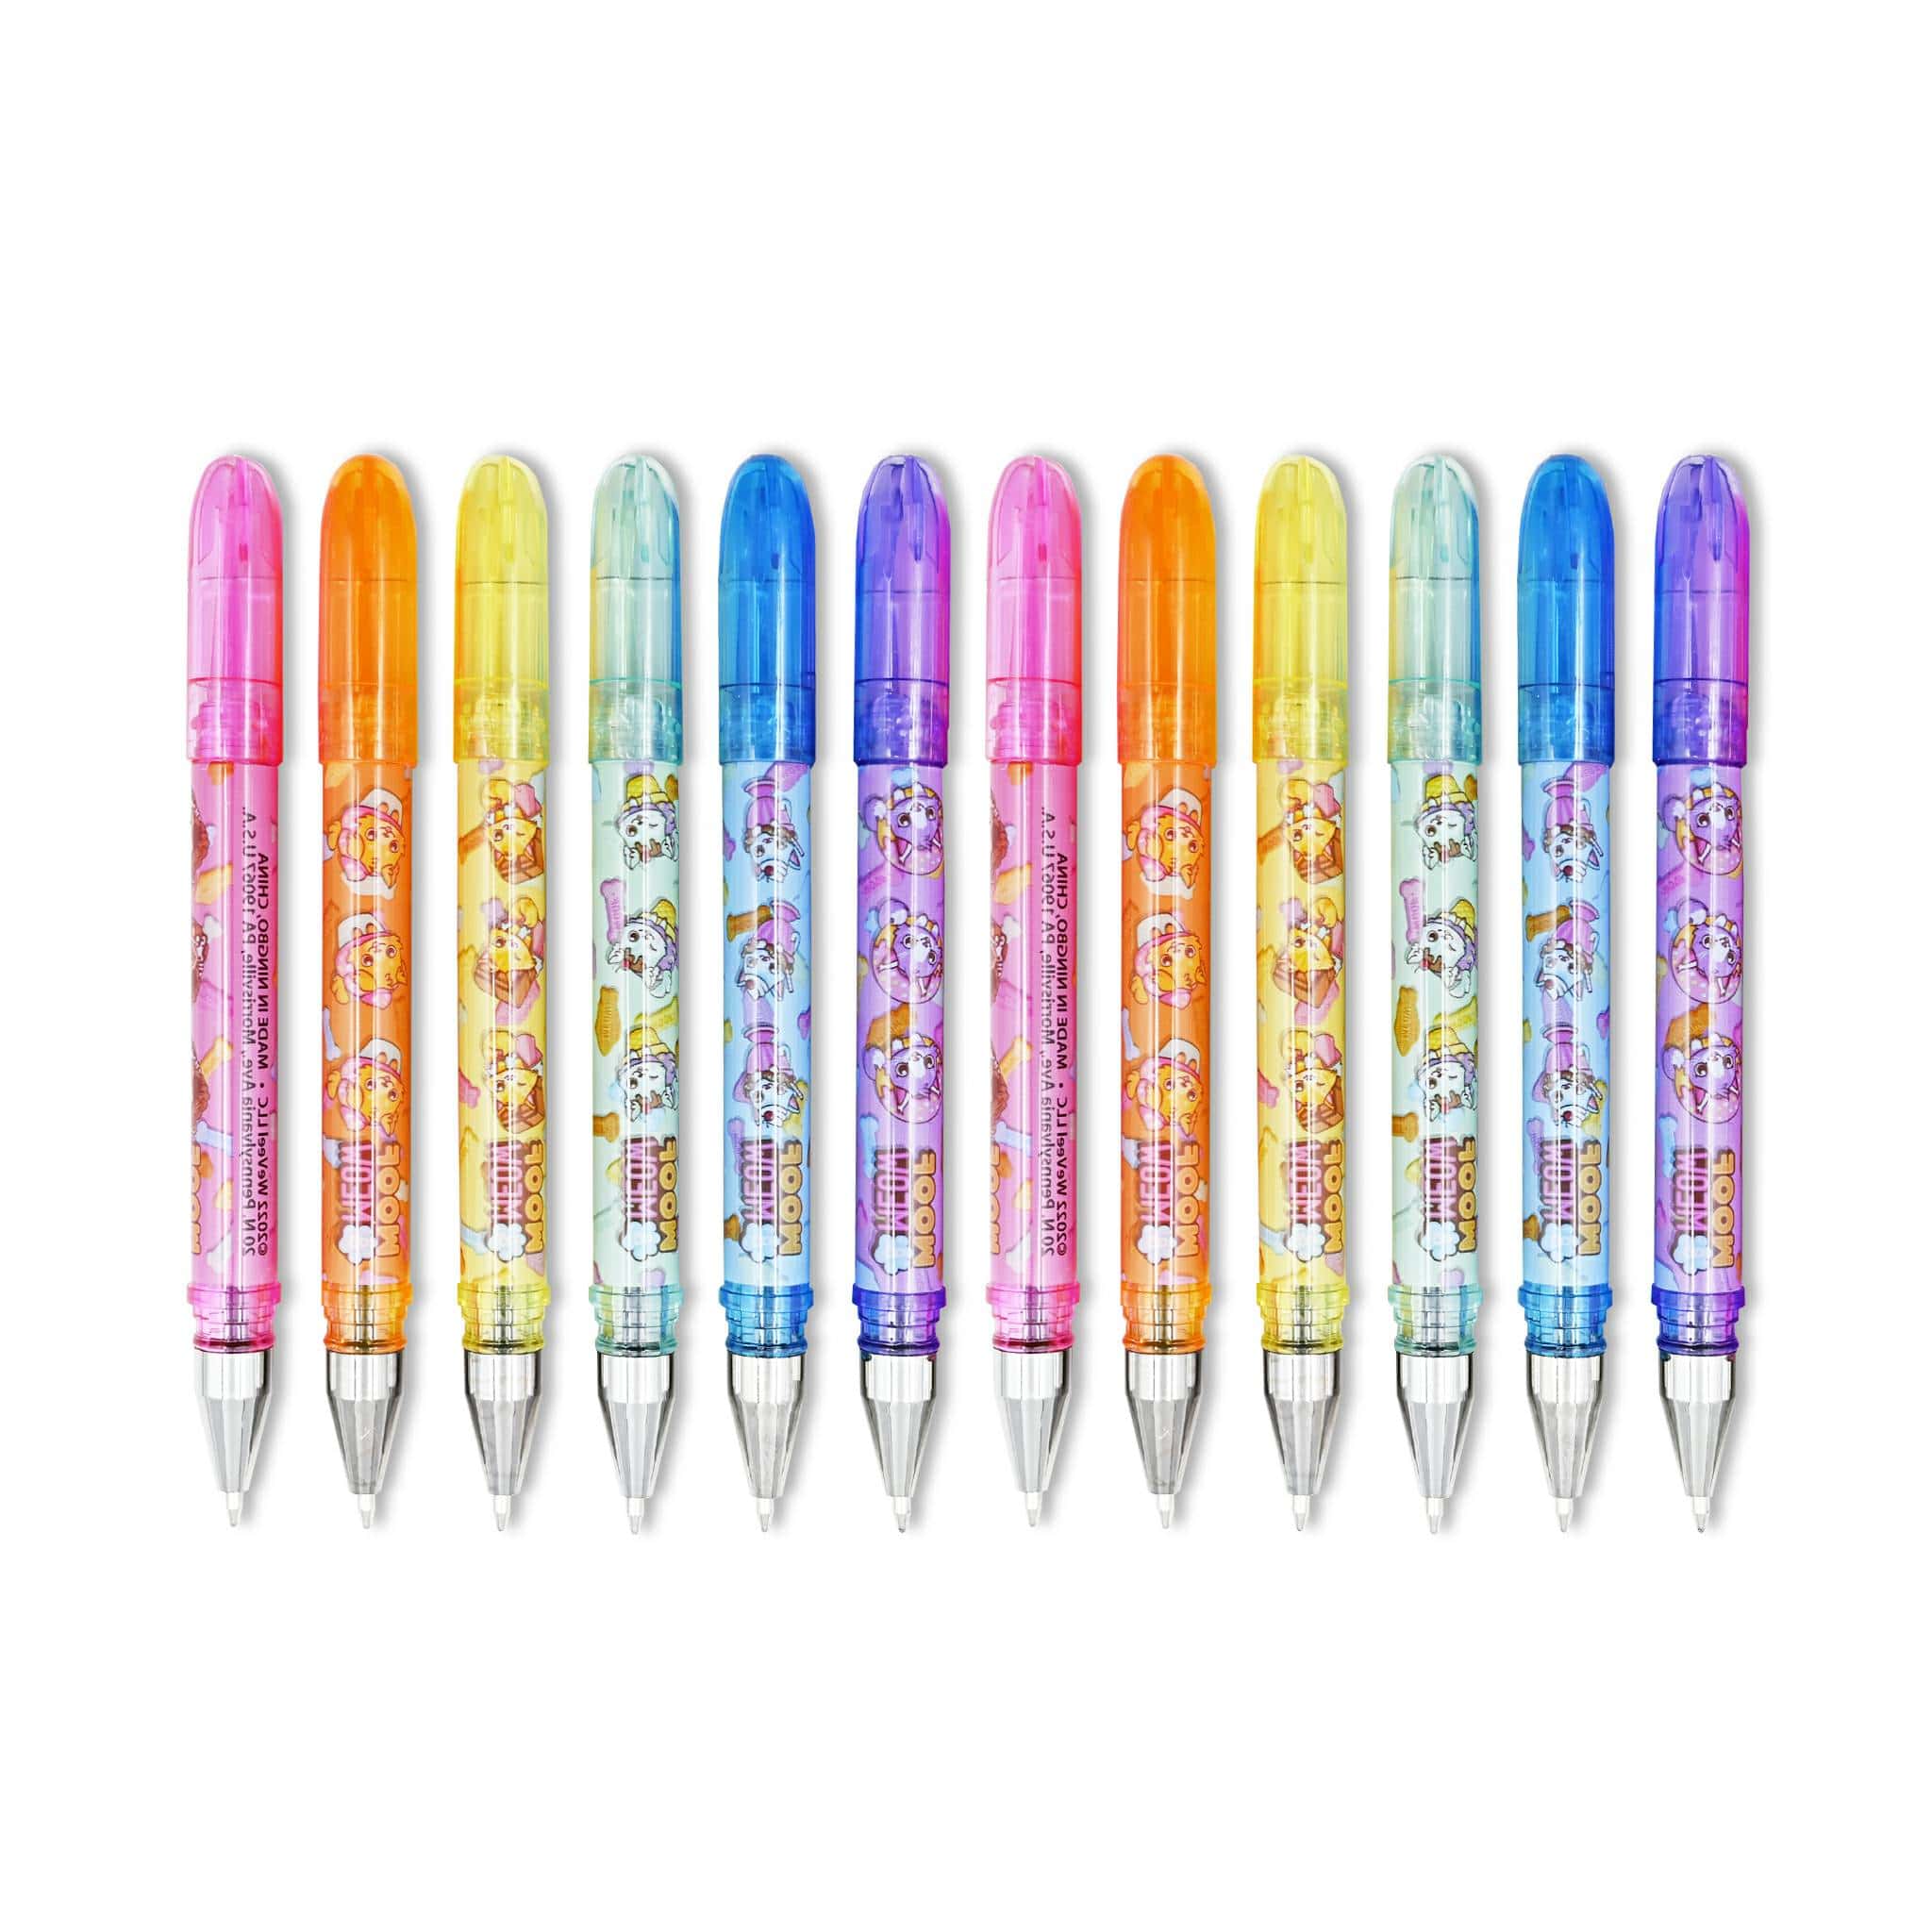 Colorful Candy Scented Gel Pens for Creative Journaling - 24-Pack